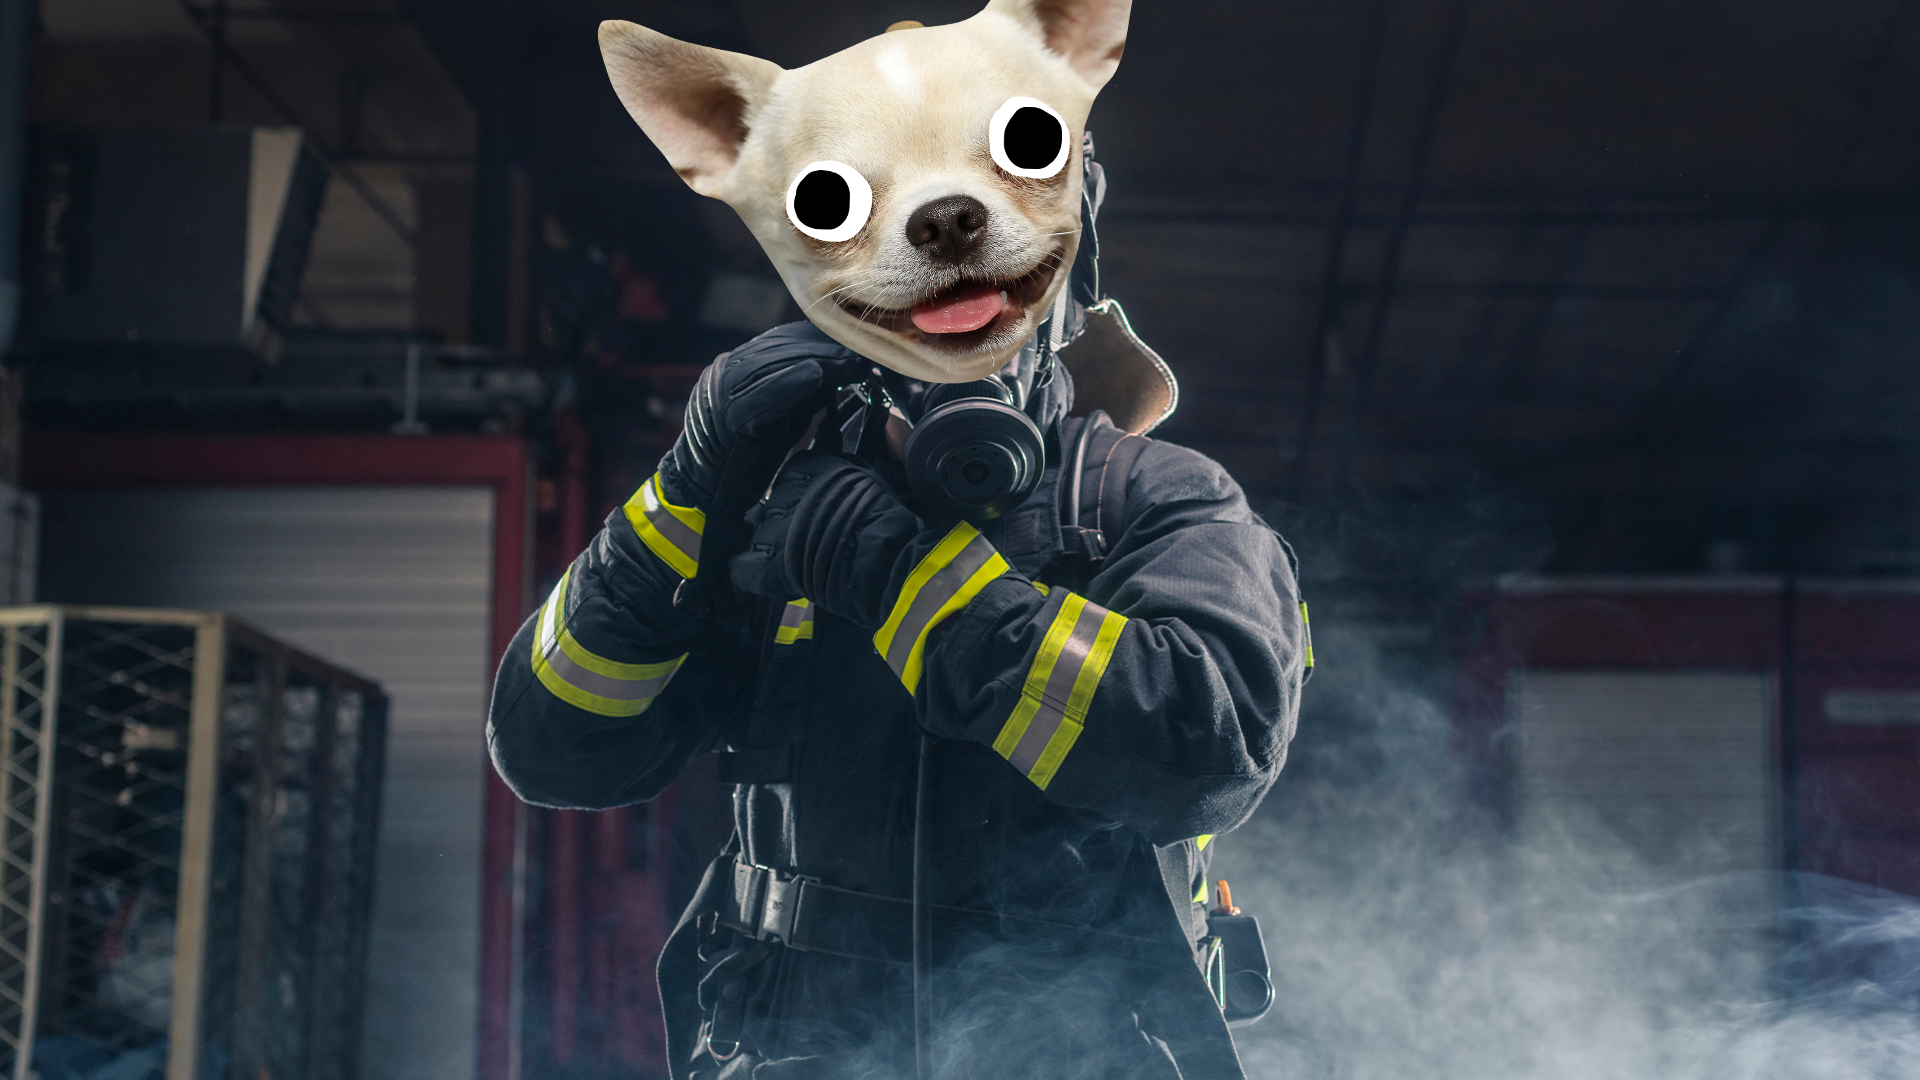 Firefighter with a goofy dog's face